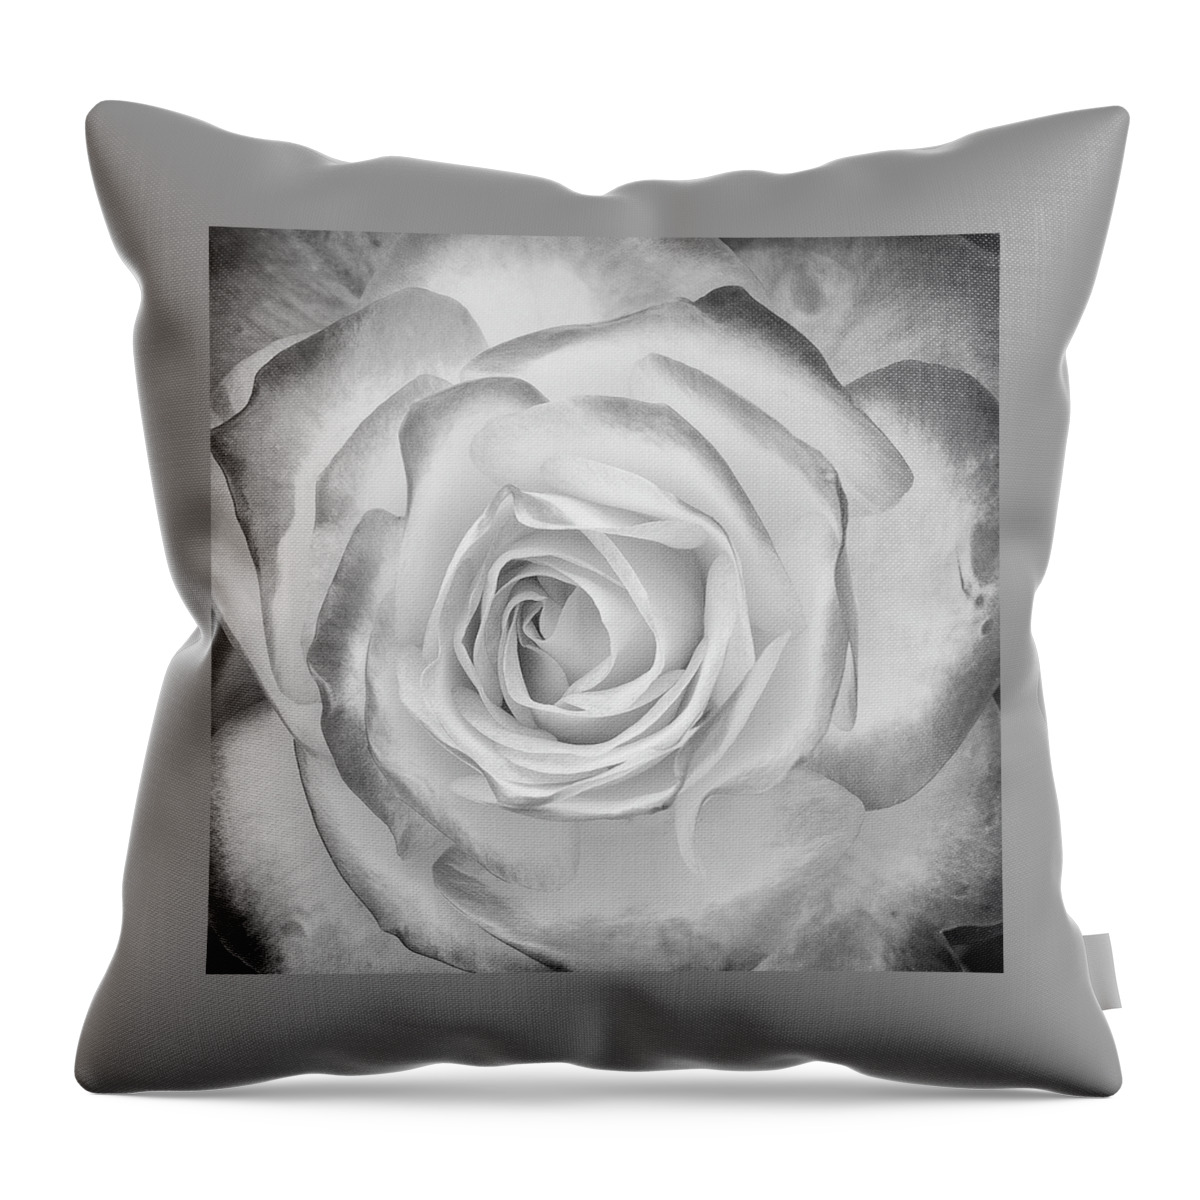 Monochrome Throw Pillow featuring the photograph Monochrome Rose by John Roach